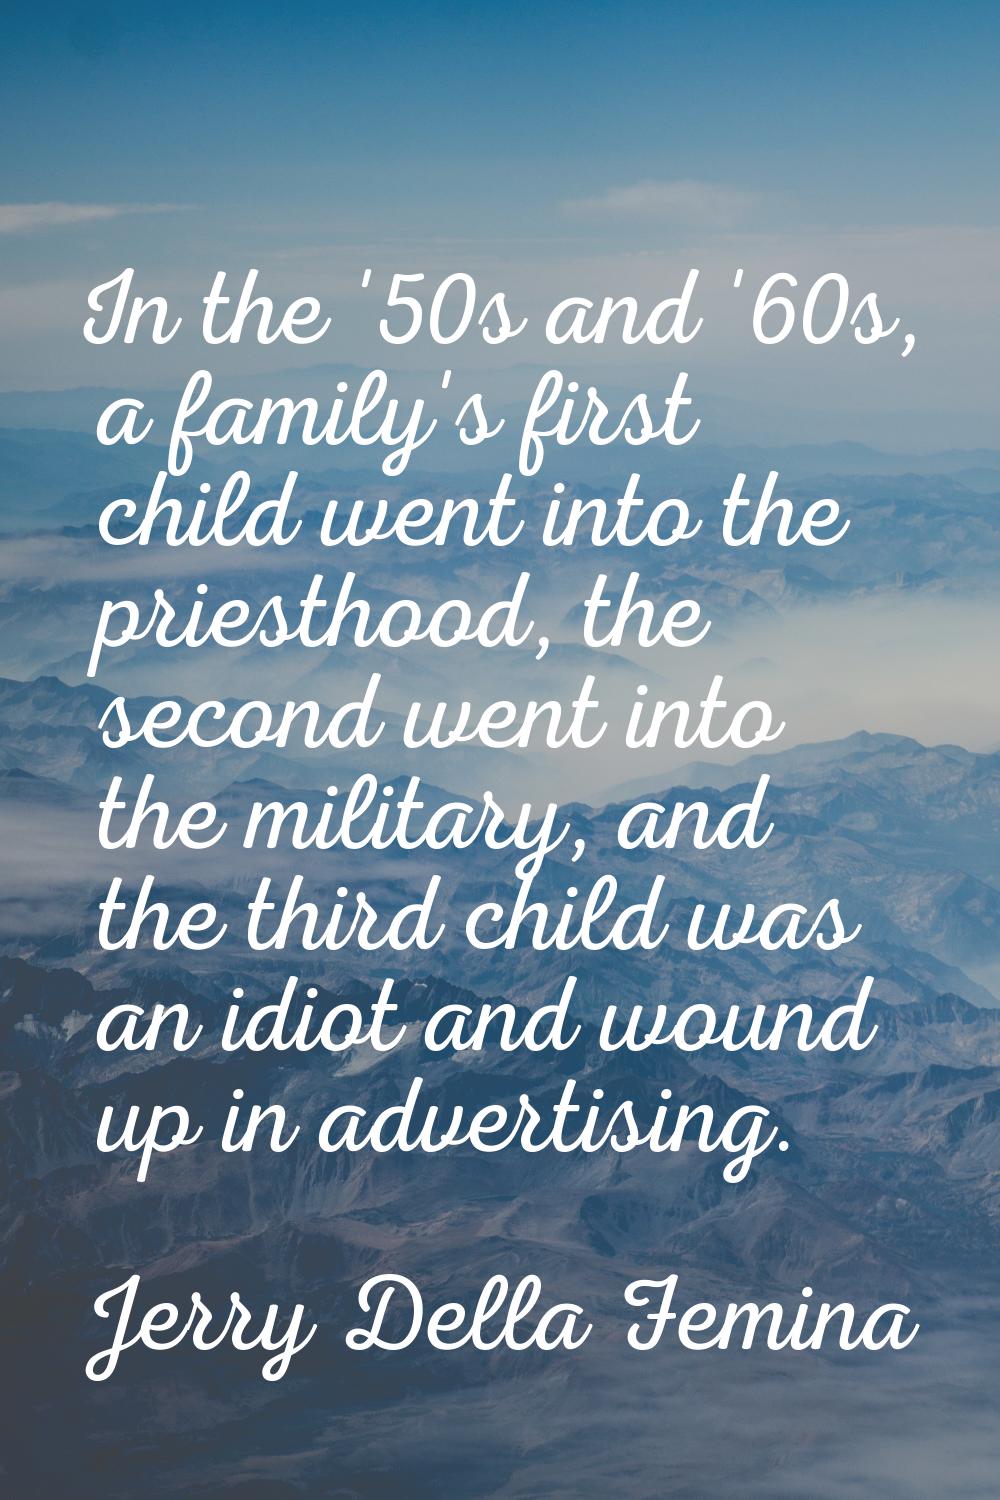 In the '50s and '60s, a family's first child went into the priesthood, the second went into the mil